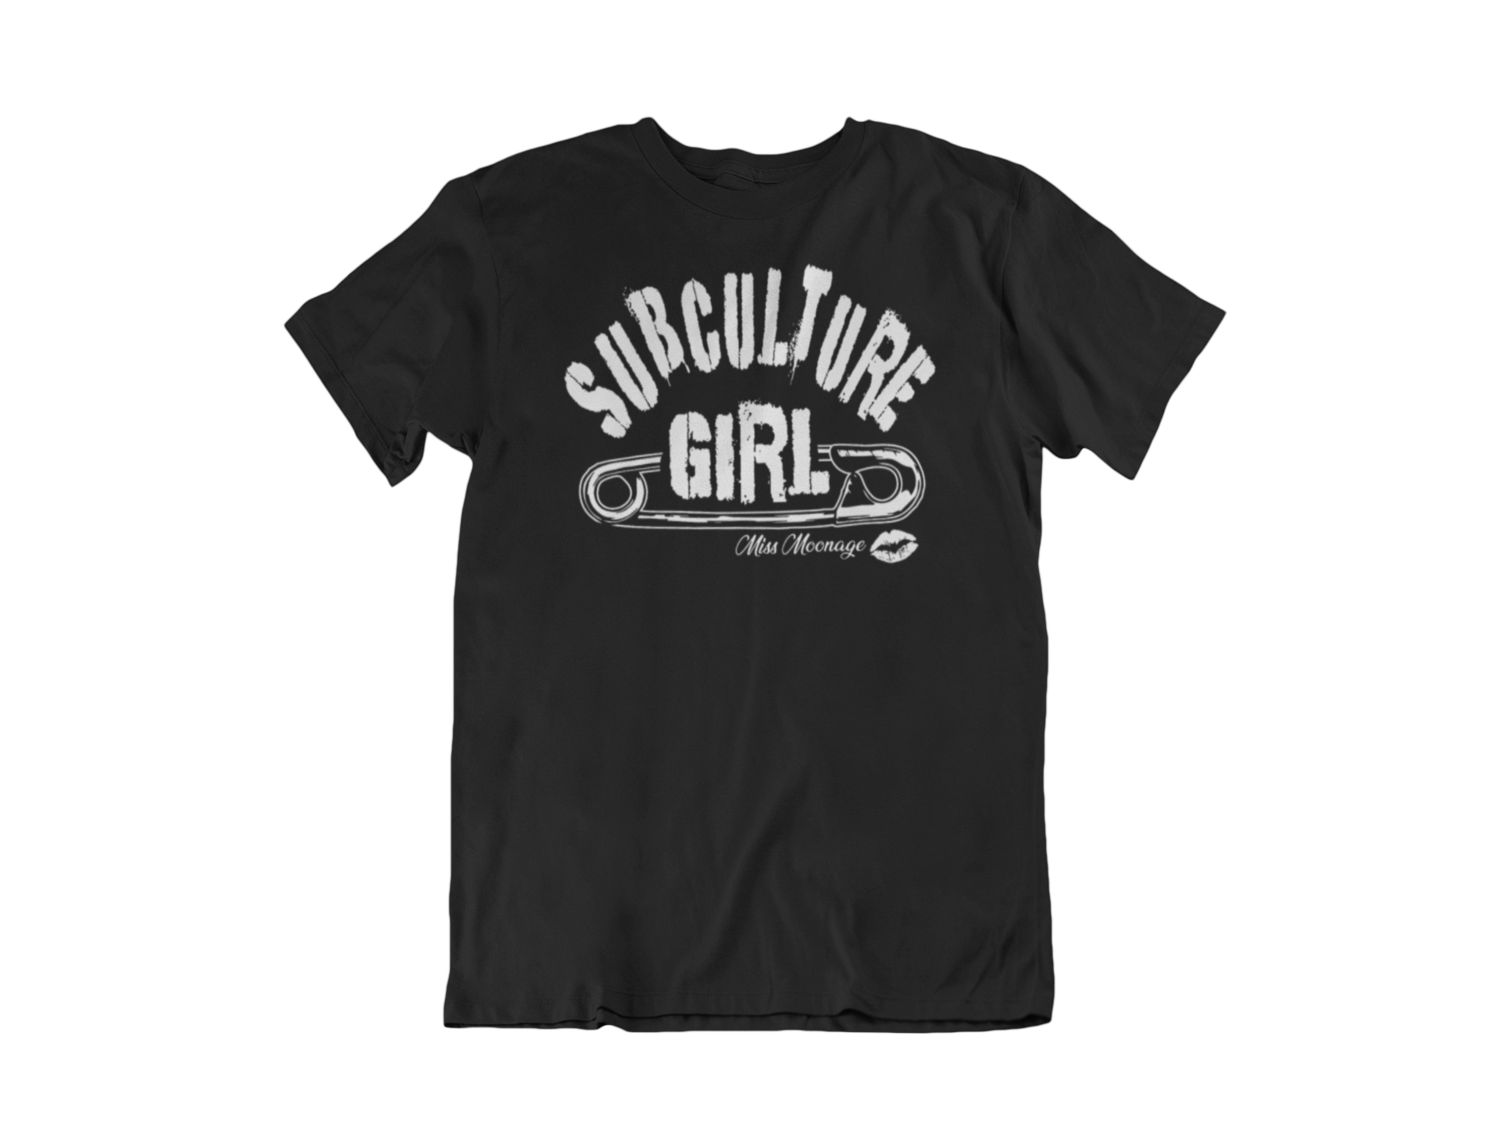 SUBCULTURE GIRL by MISS MOONAGE tshirt for MEN